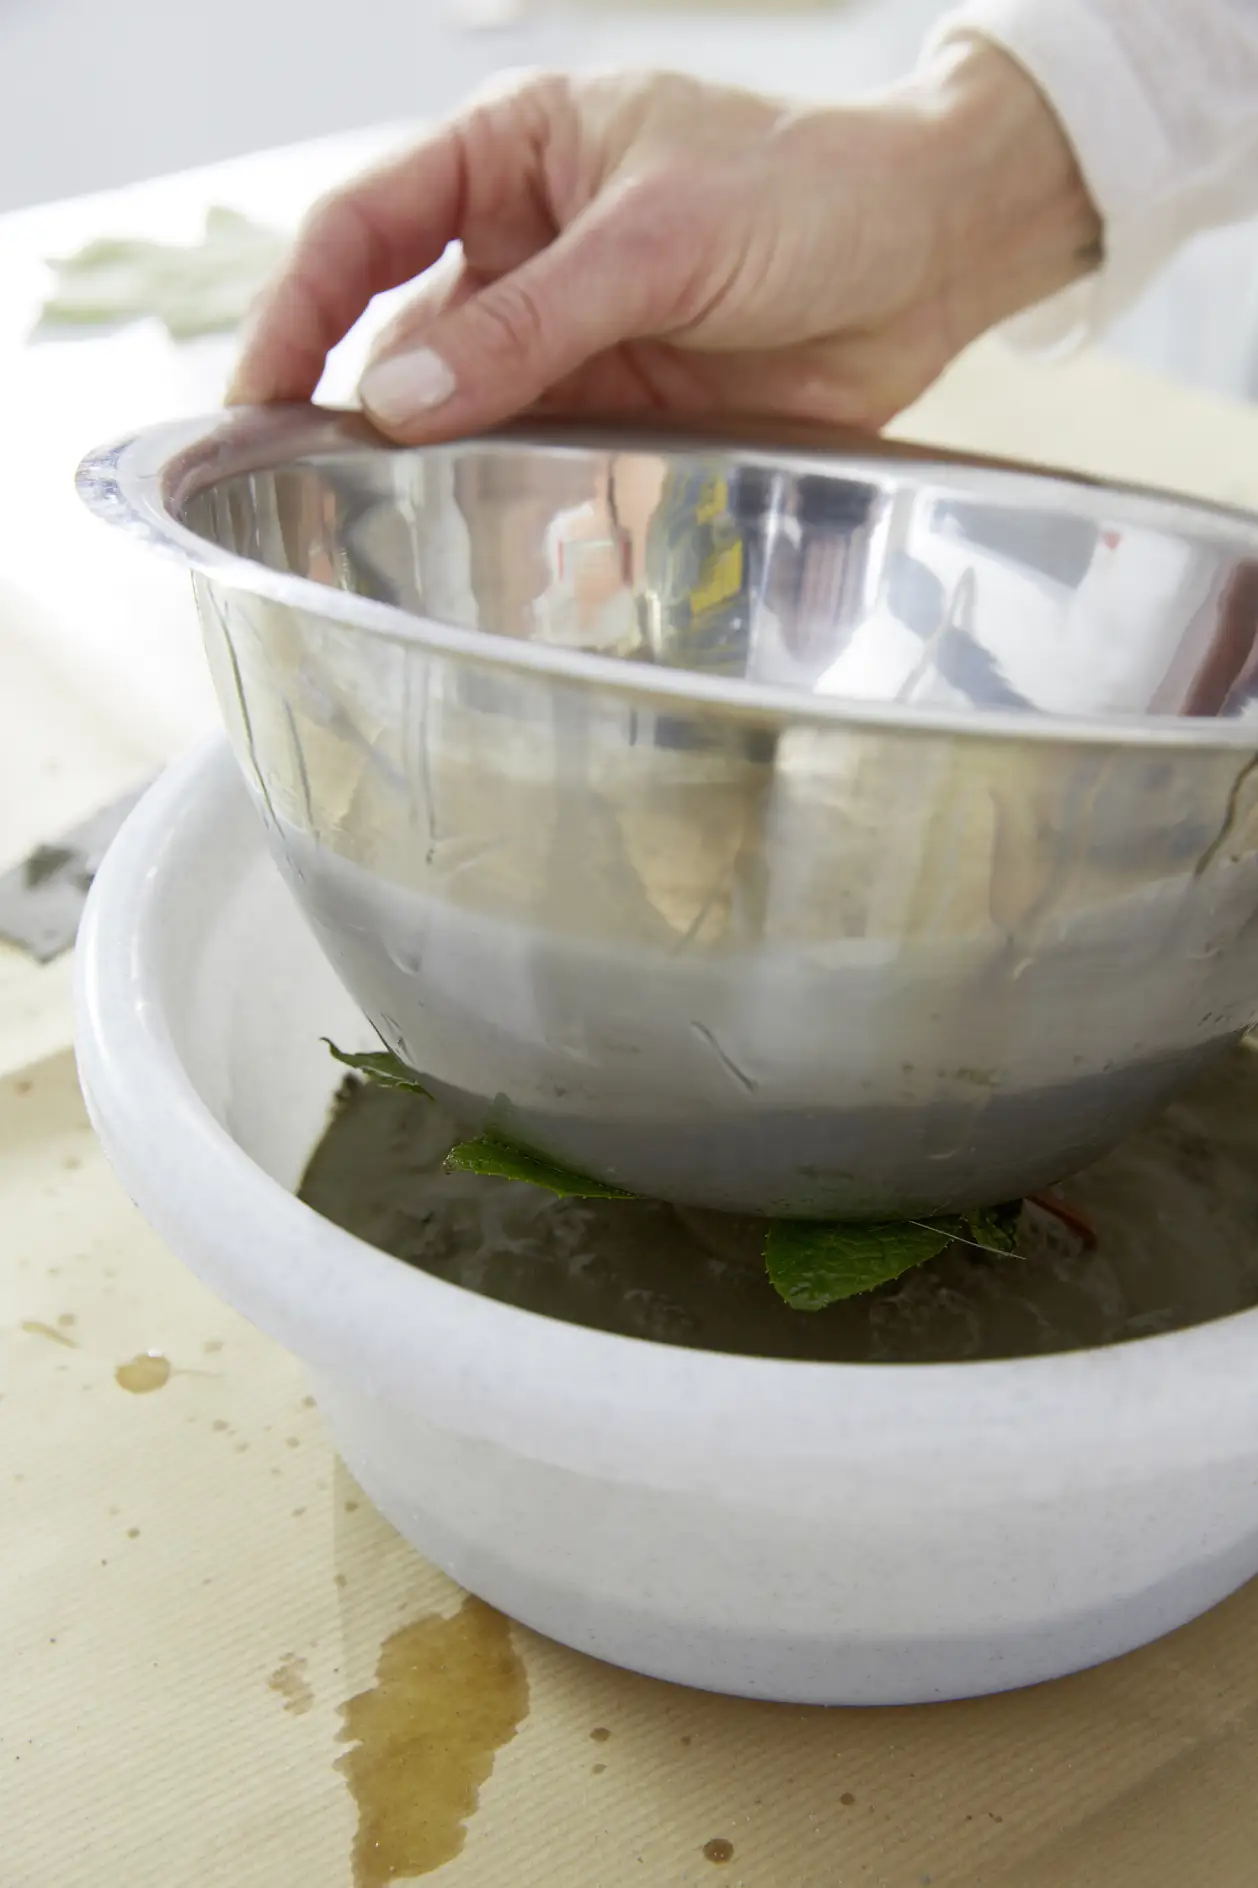 Pour the mixture into the larger bowl, place the smaller bowl with the leaf inside. Press the smaller bowl down.